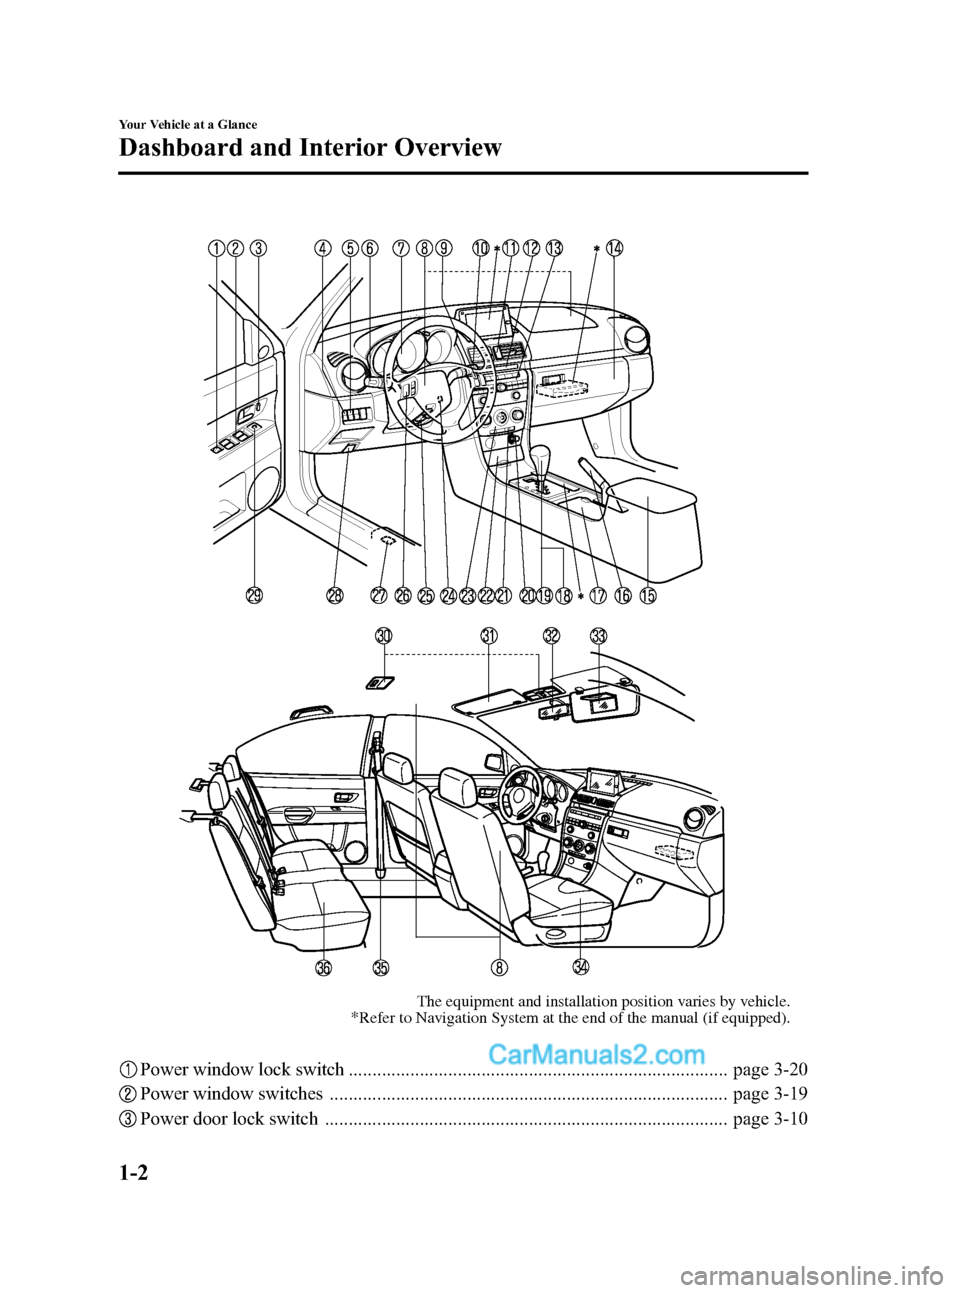 MAZDA MODEL MAZDASPEED 3 2007  Owners Manual (in English) Black plate (8,1)
The equipment and installation position varies by vehicle.
*Refer to Navigation System at the end of the manual (if equipped).
Power window lock switch ..............................